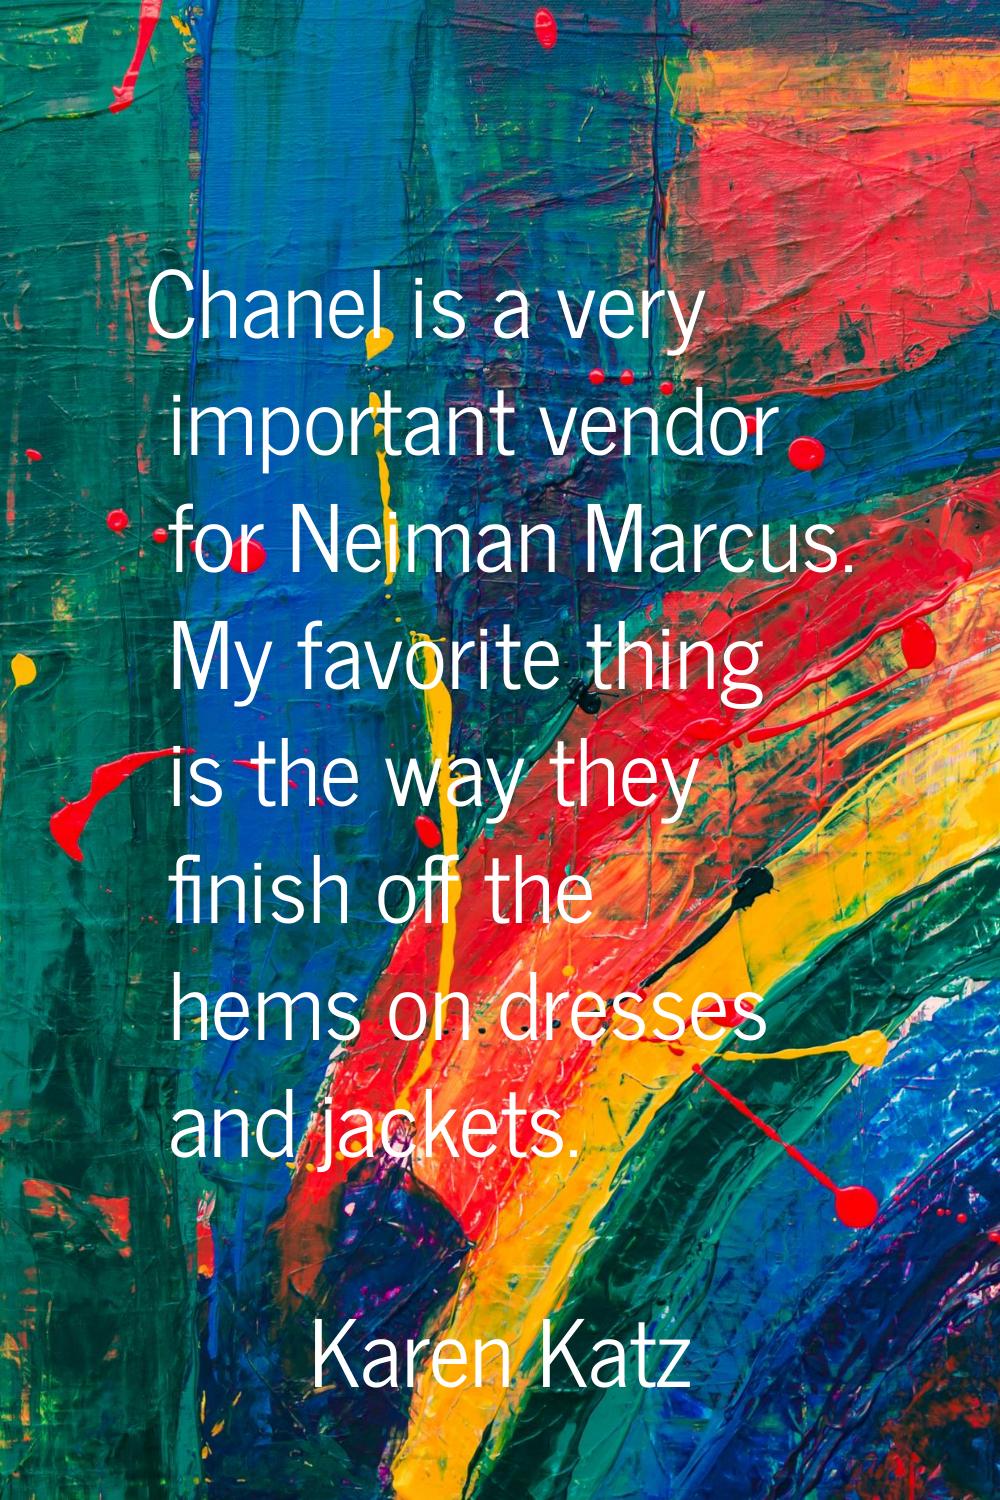 Chanel is a very important vendor for Neiman Marcus. My favorite thing is the way they finish off t